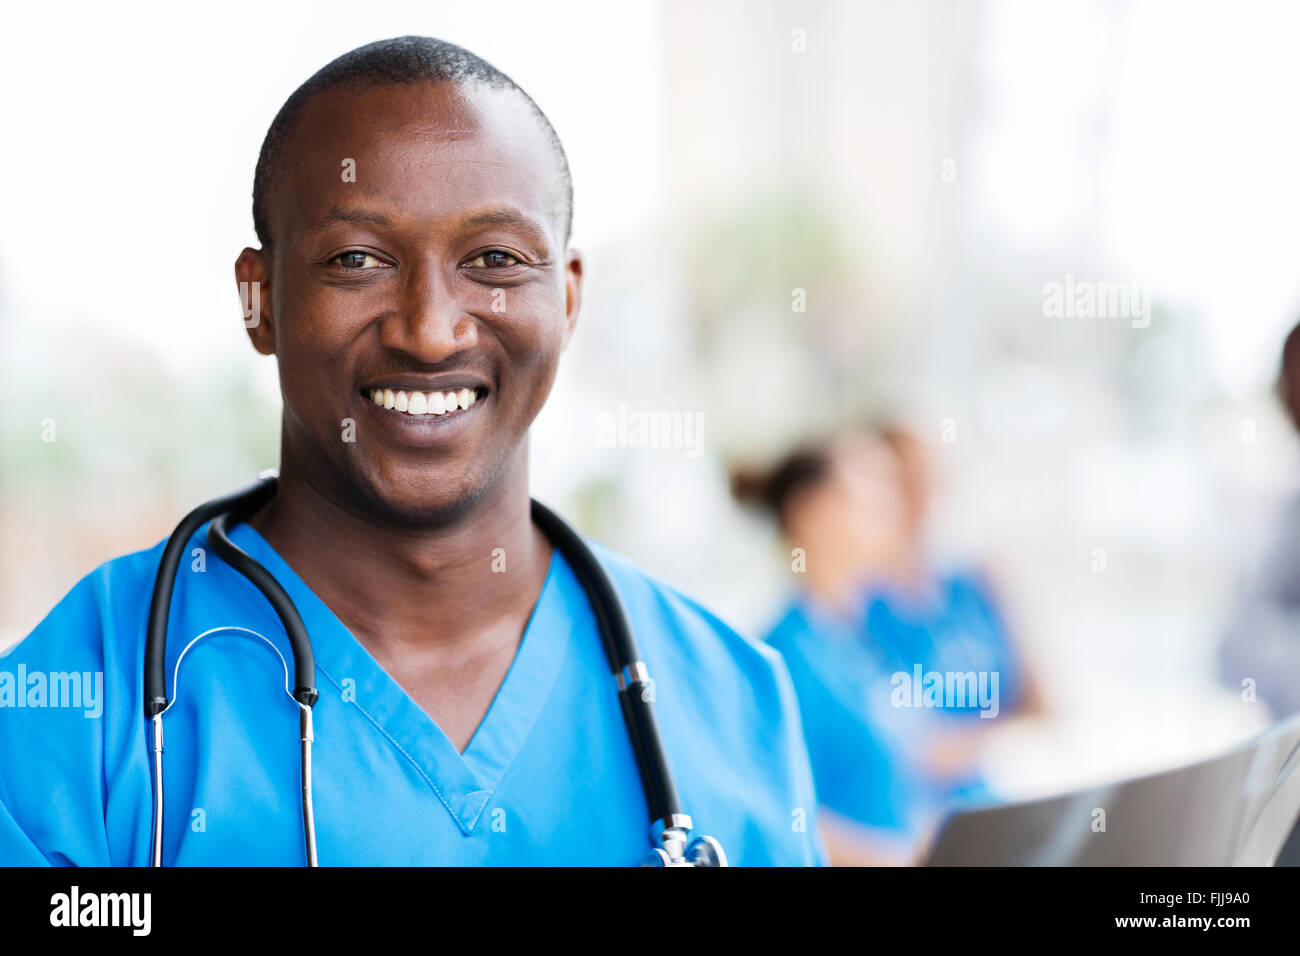 Smiling African Medical professional with stethoscope Banque D'Images